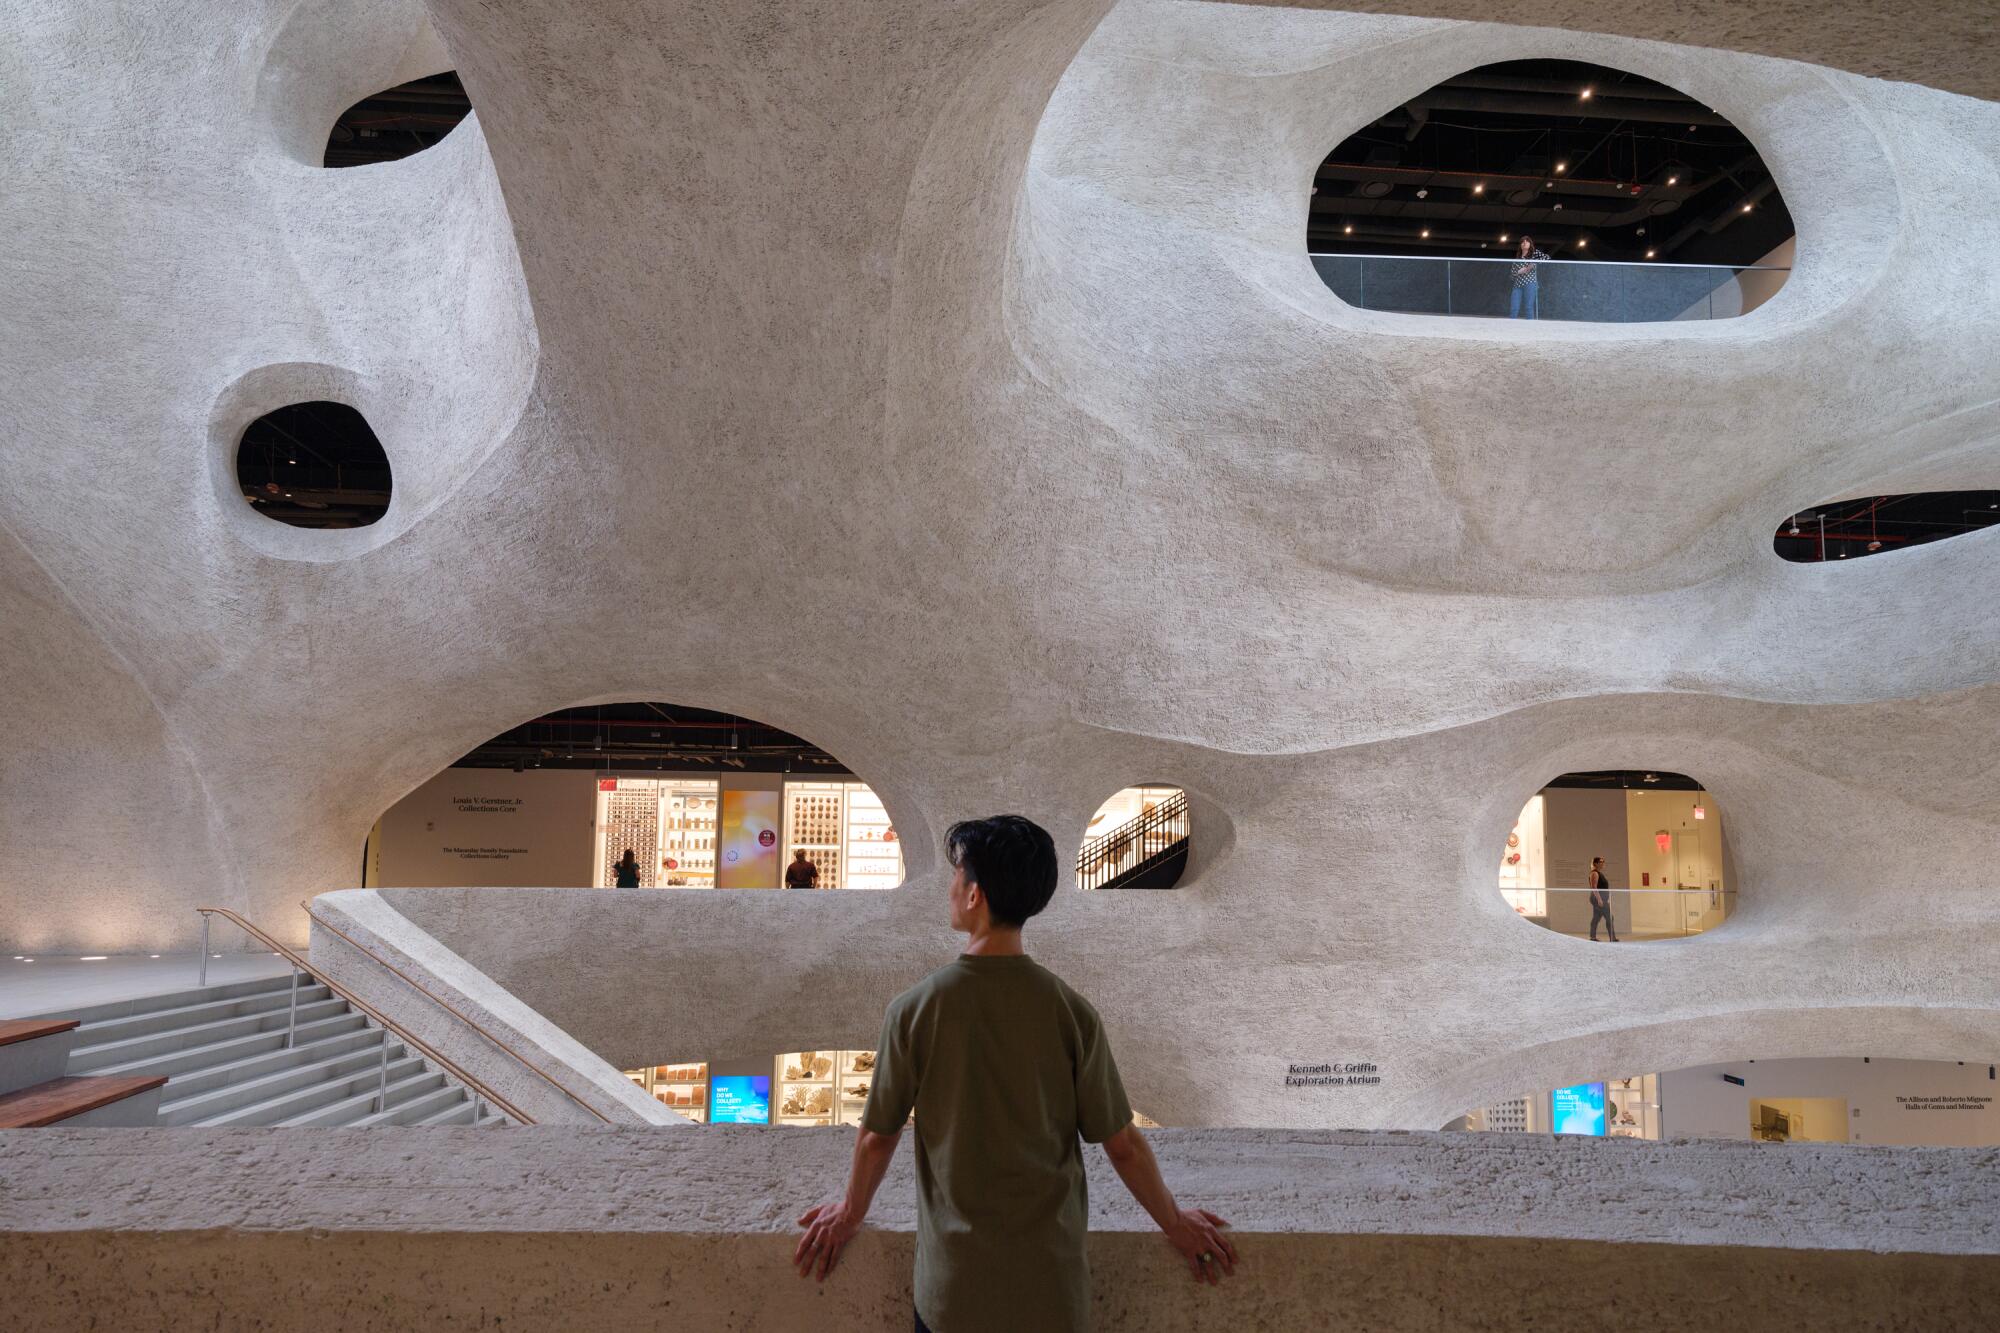 A young man stands at a balcony overlooking a large, cave-like atrium filled with the echoes of children's voices